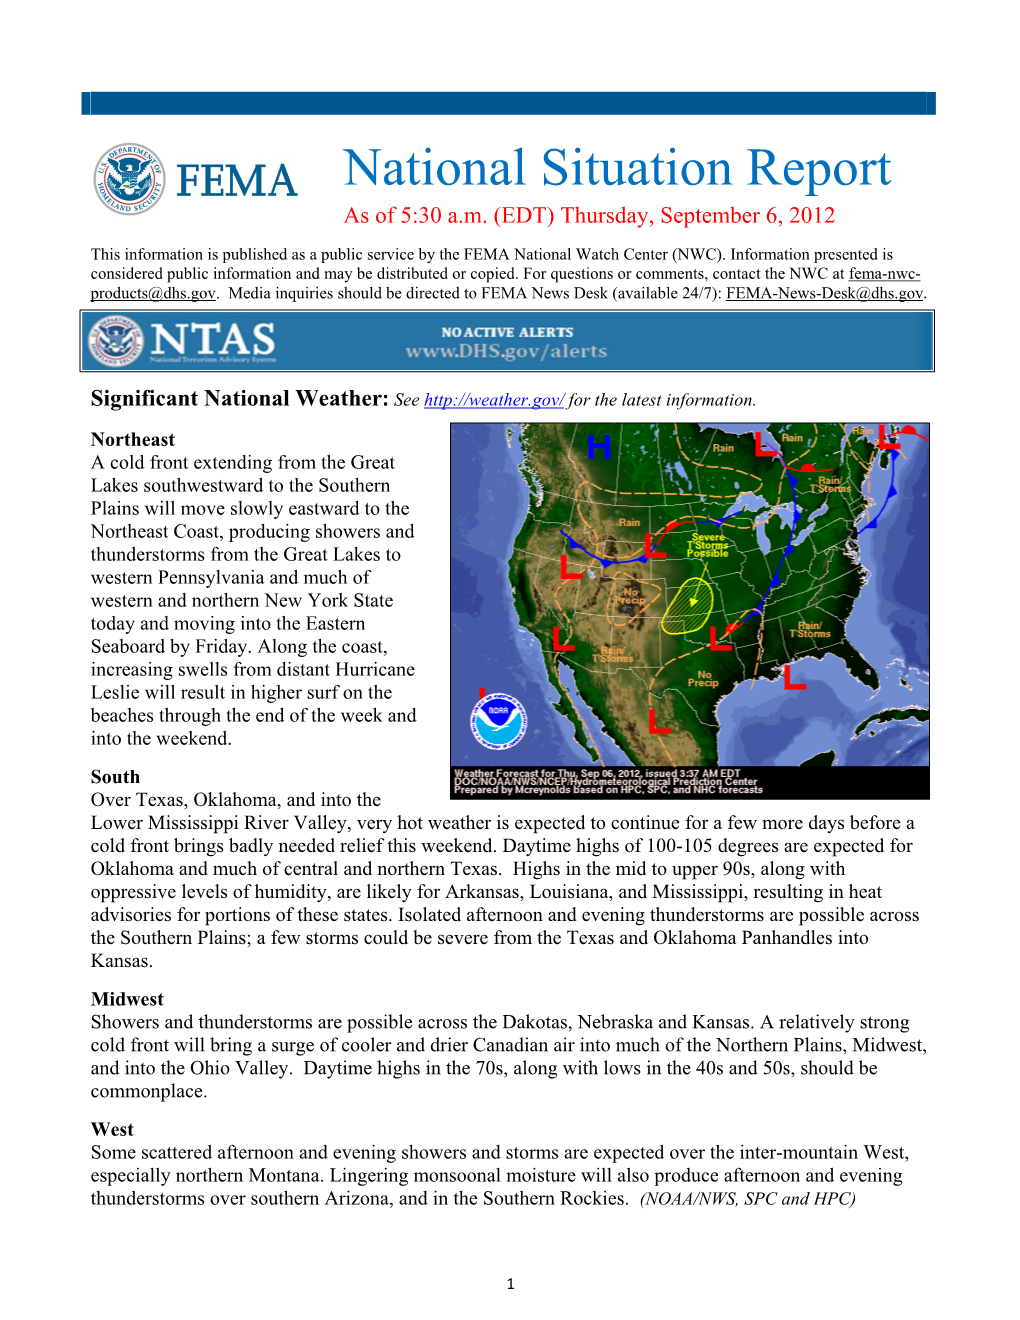 National Situation Report As of 5:30 A.M